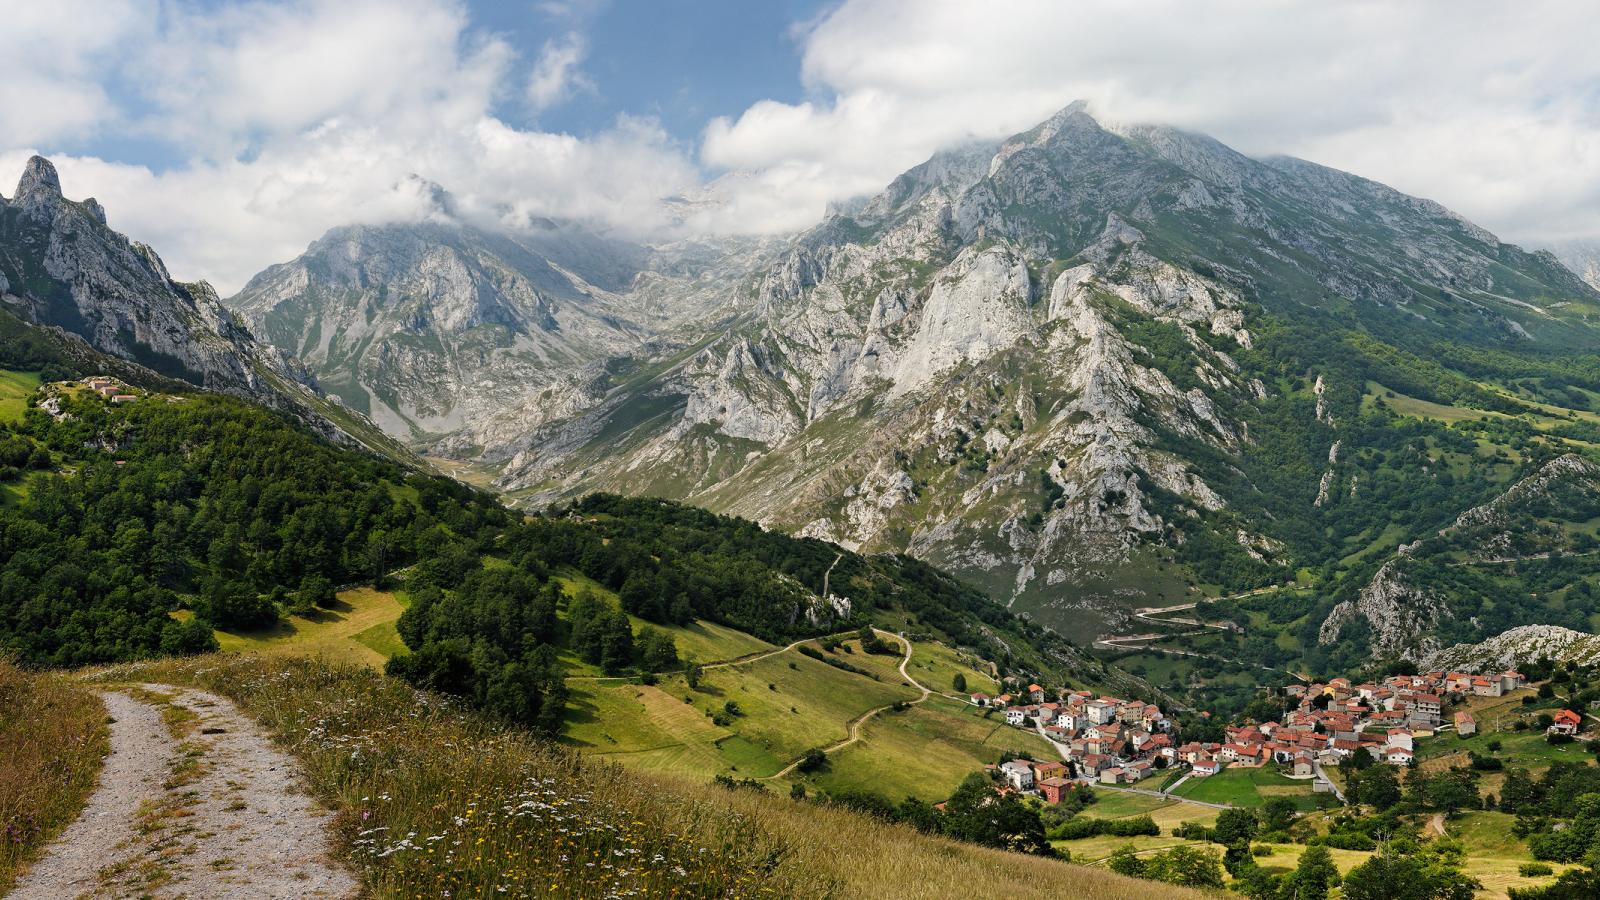 The Picos de Europa National Park in Spain, Photo credit: Wikimedia Commons